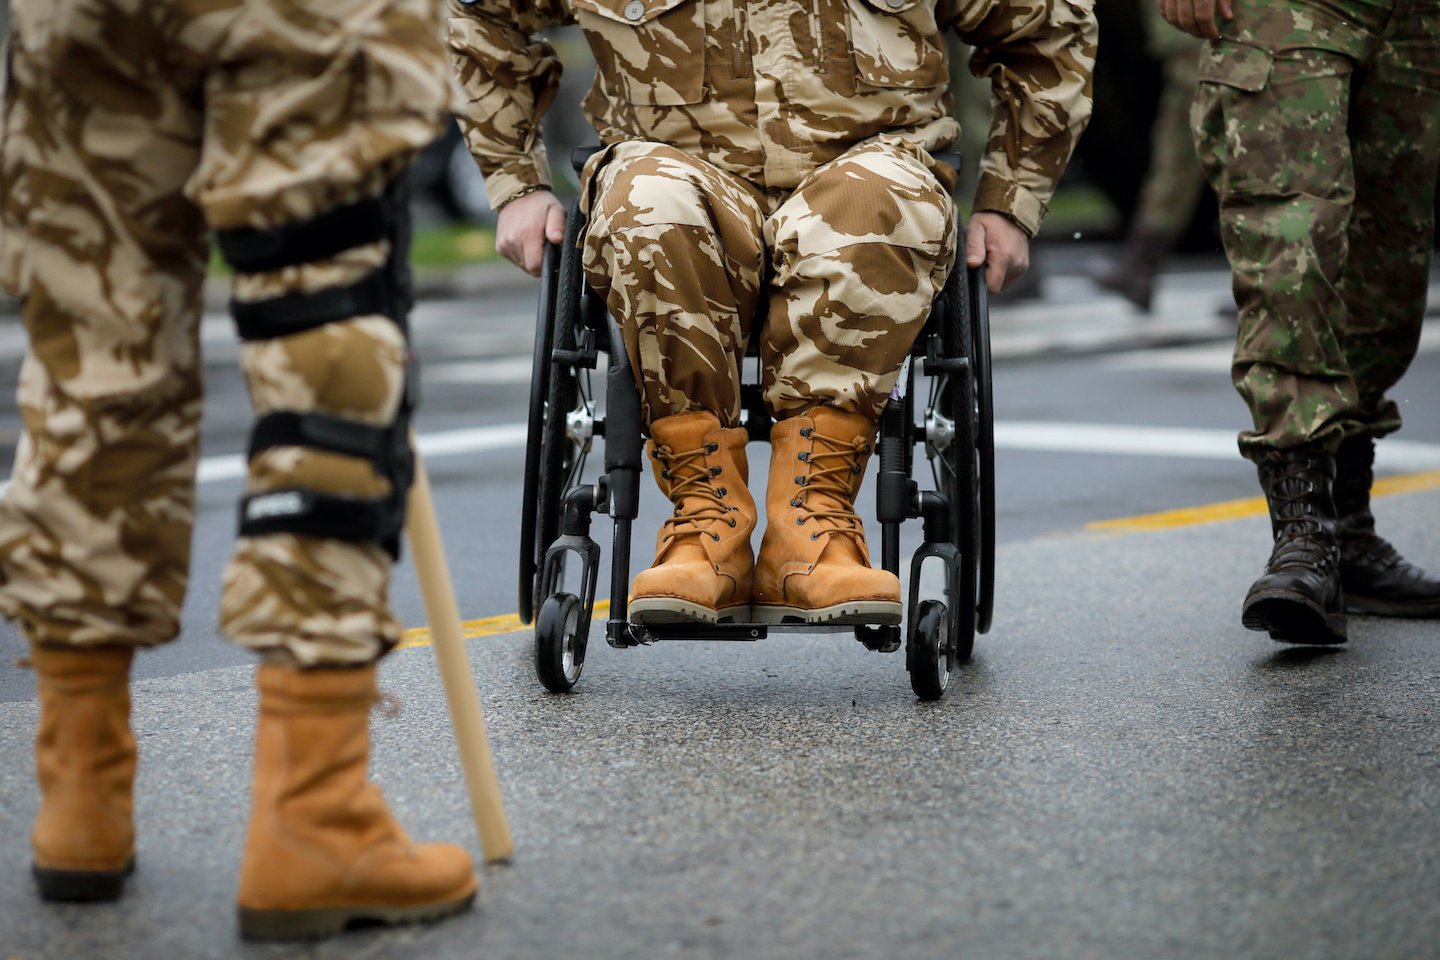 Details with a Romanian army veteran soldier, injured and disabled, sitting in a wheelchair dressed in his military desert camouflage uniform.